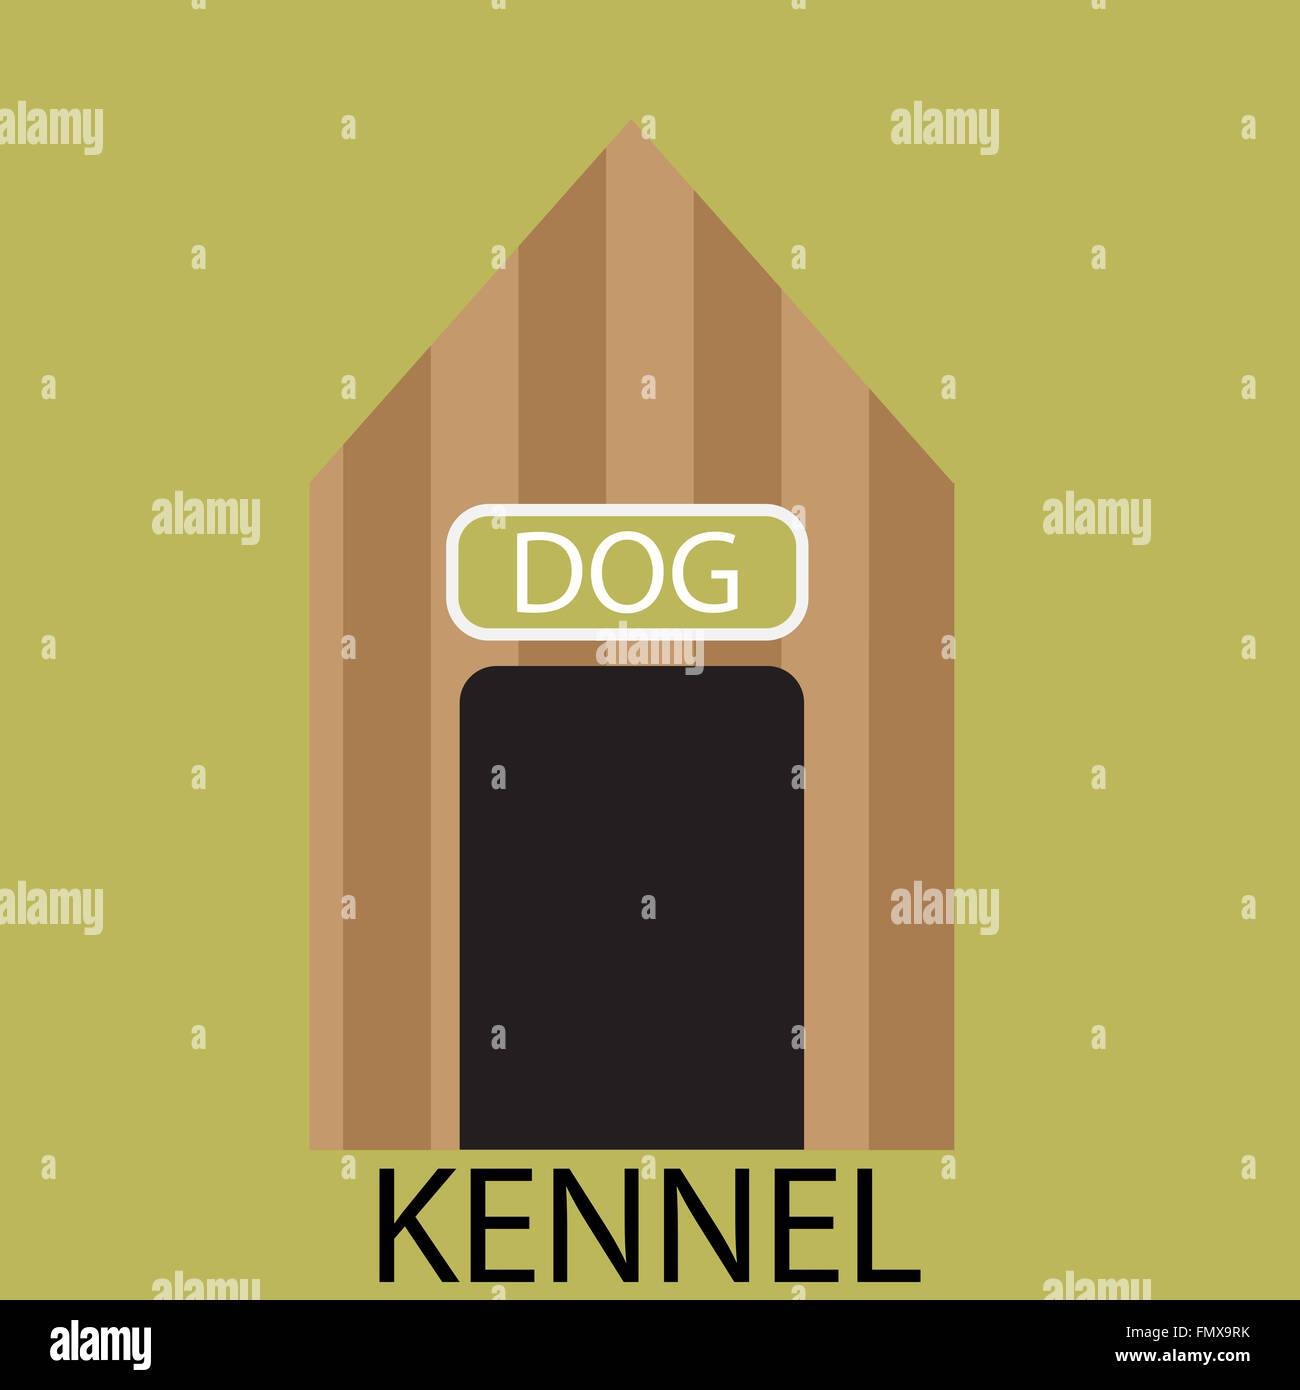 Kennel dog icon flat. Kennel puppy, pet doghouse, house or cabin, wood building. Vector abstract flat design illustration Stock Photo